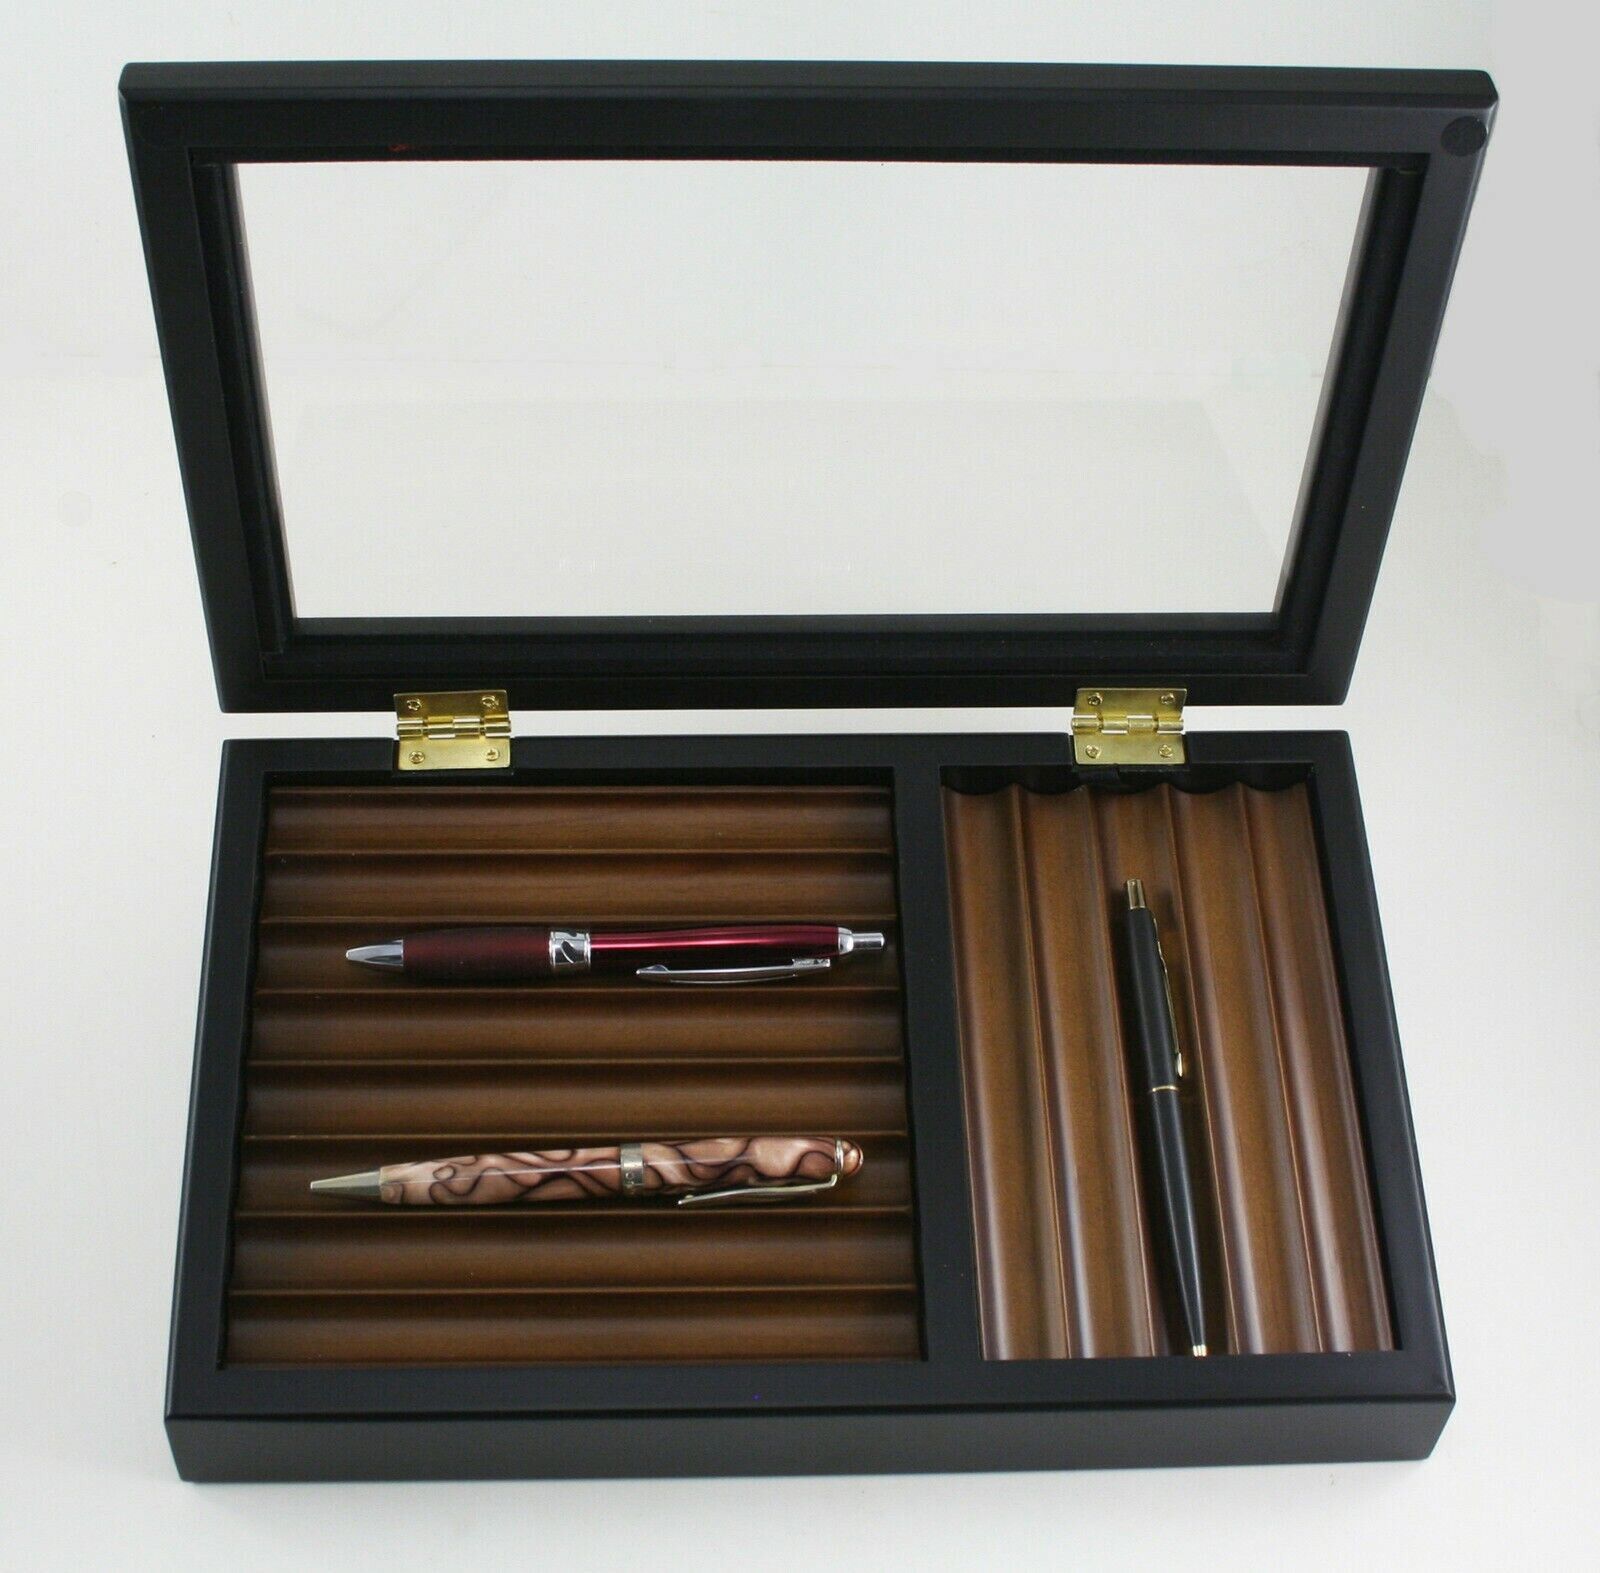 Black exterior  Wood Pen Box with Hinged Glass Top. Holds 13 Pens with Storage